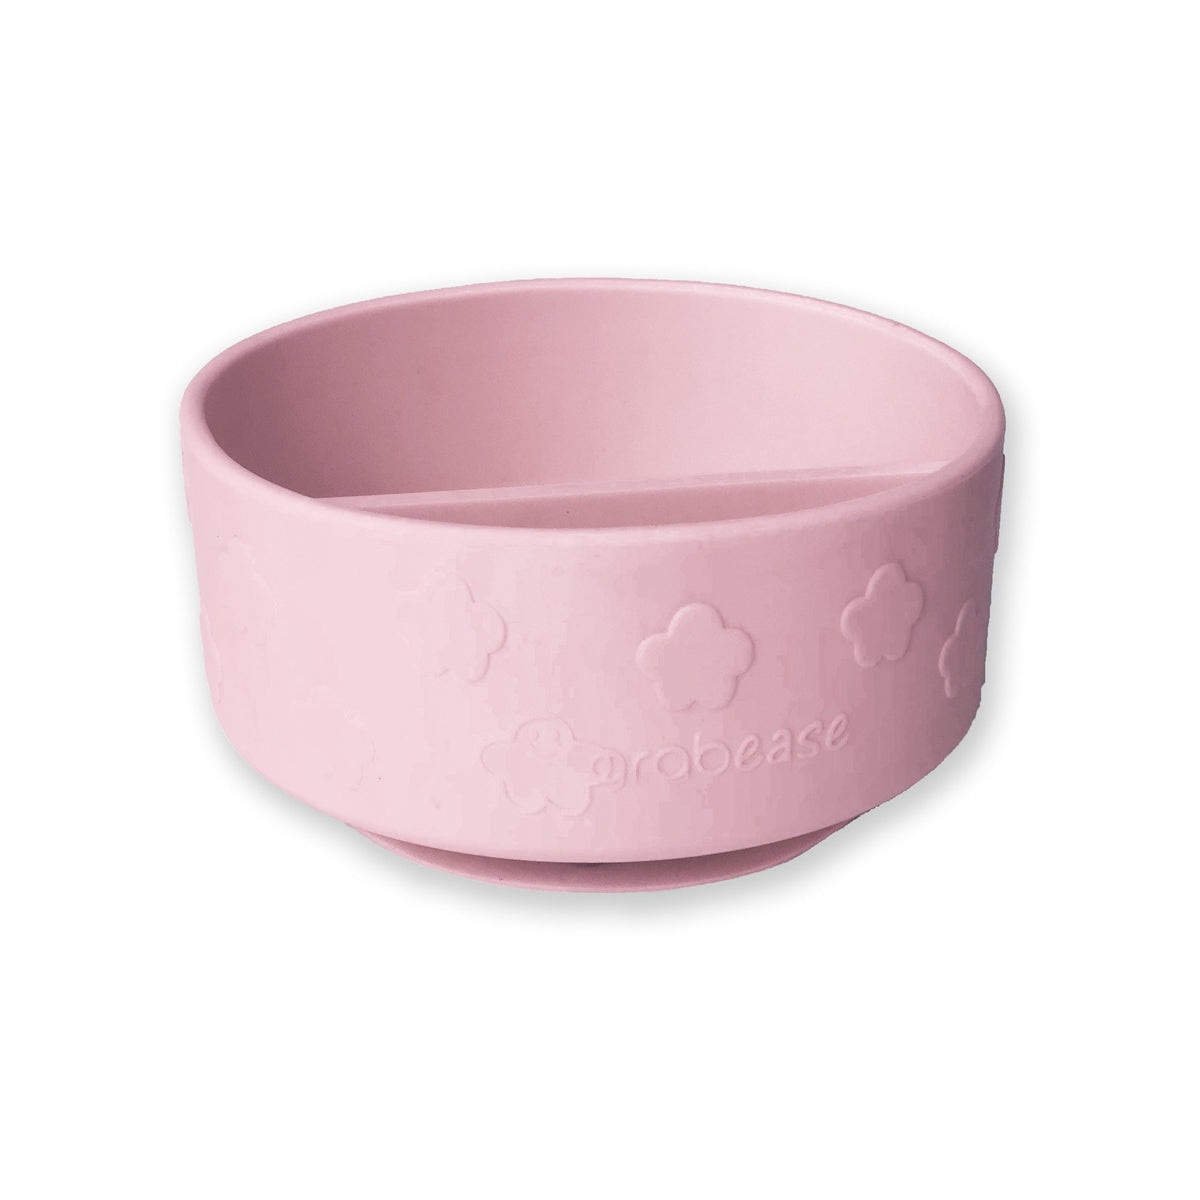 grabease-silicone-suction-bowl-pink- (1)